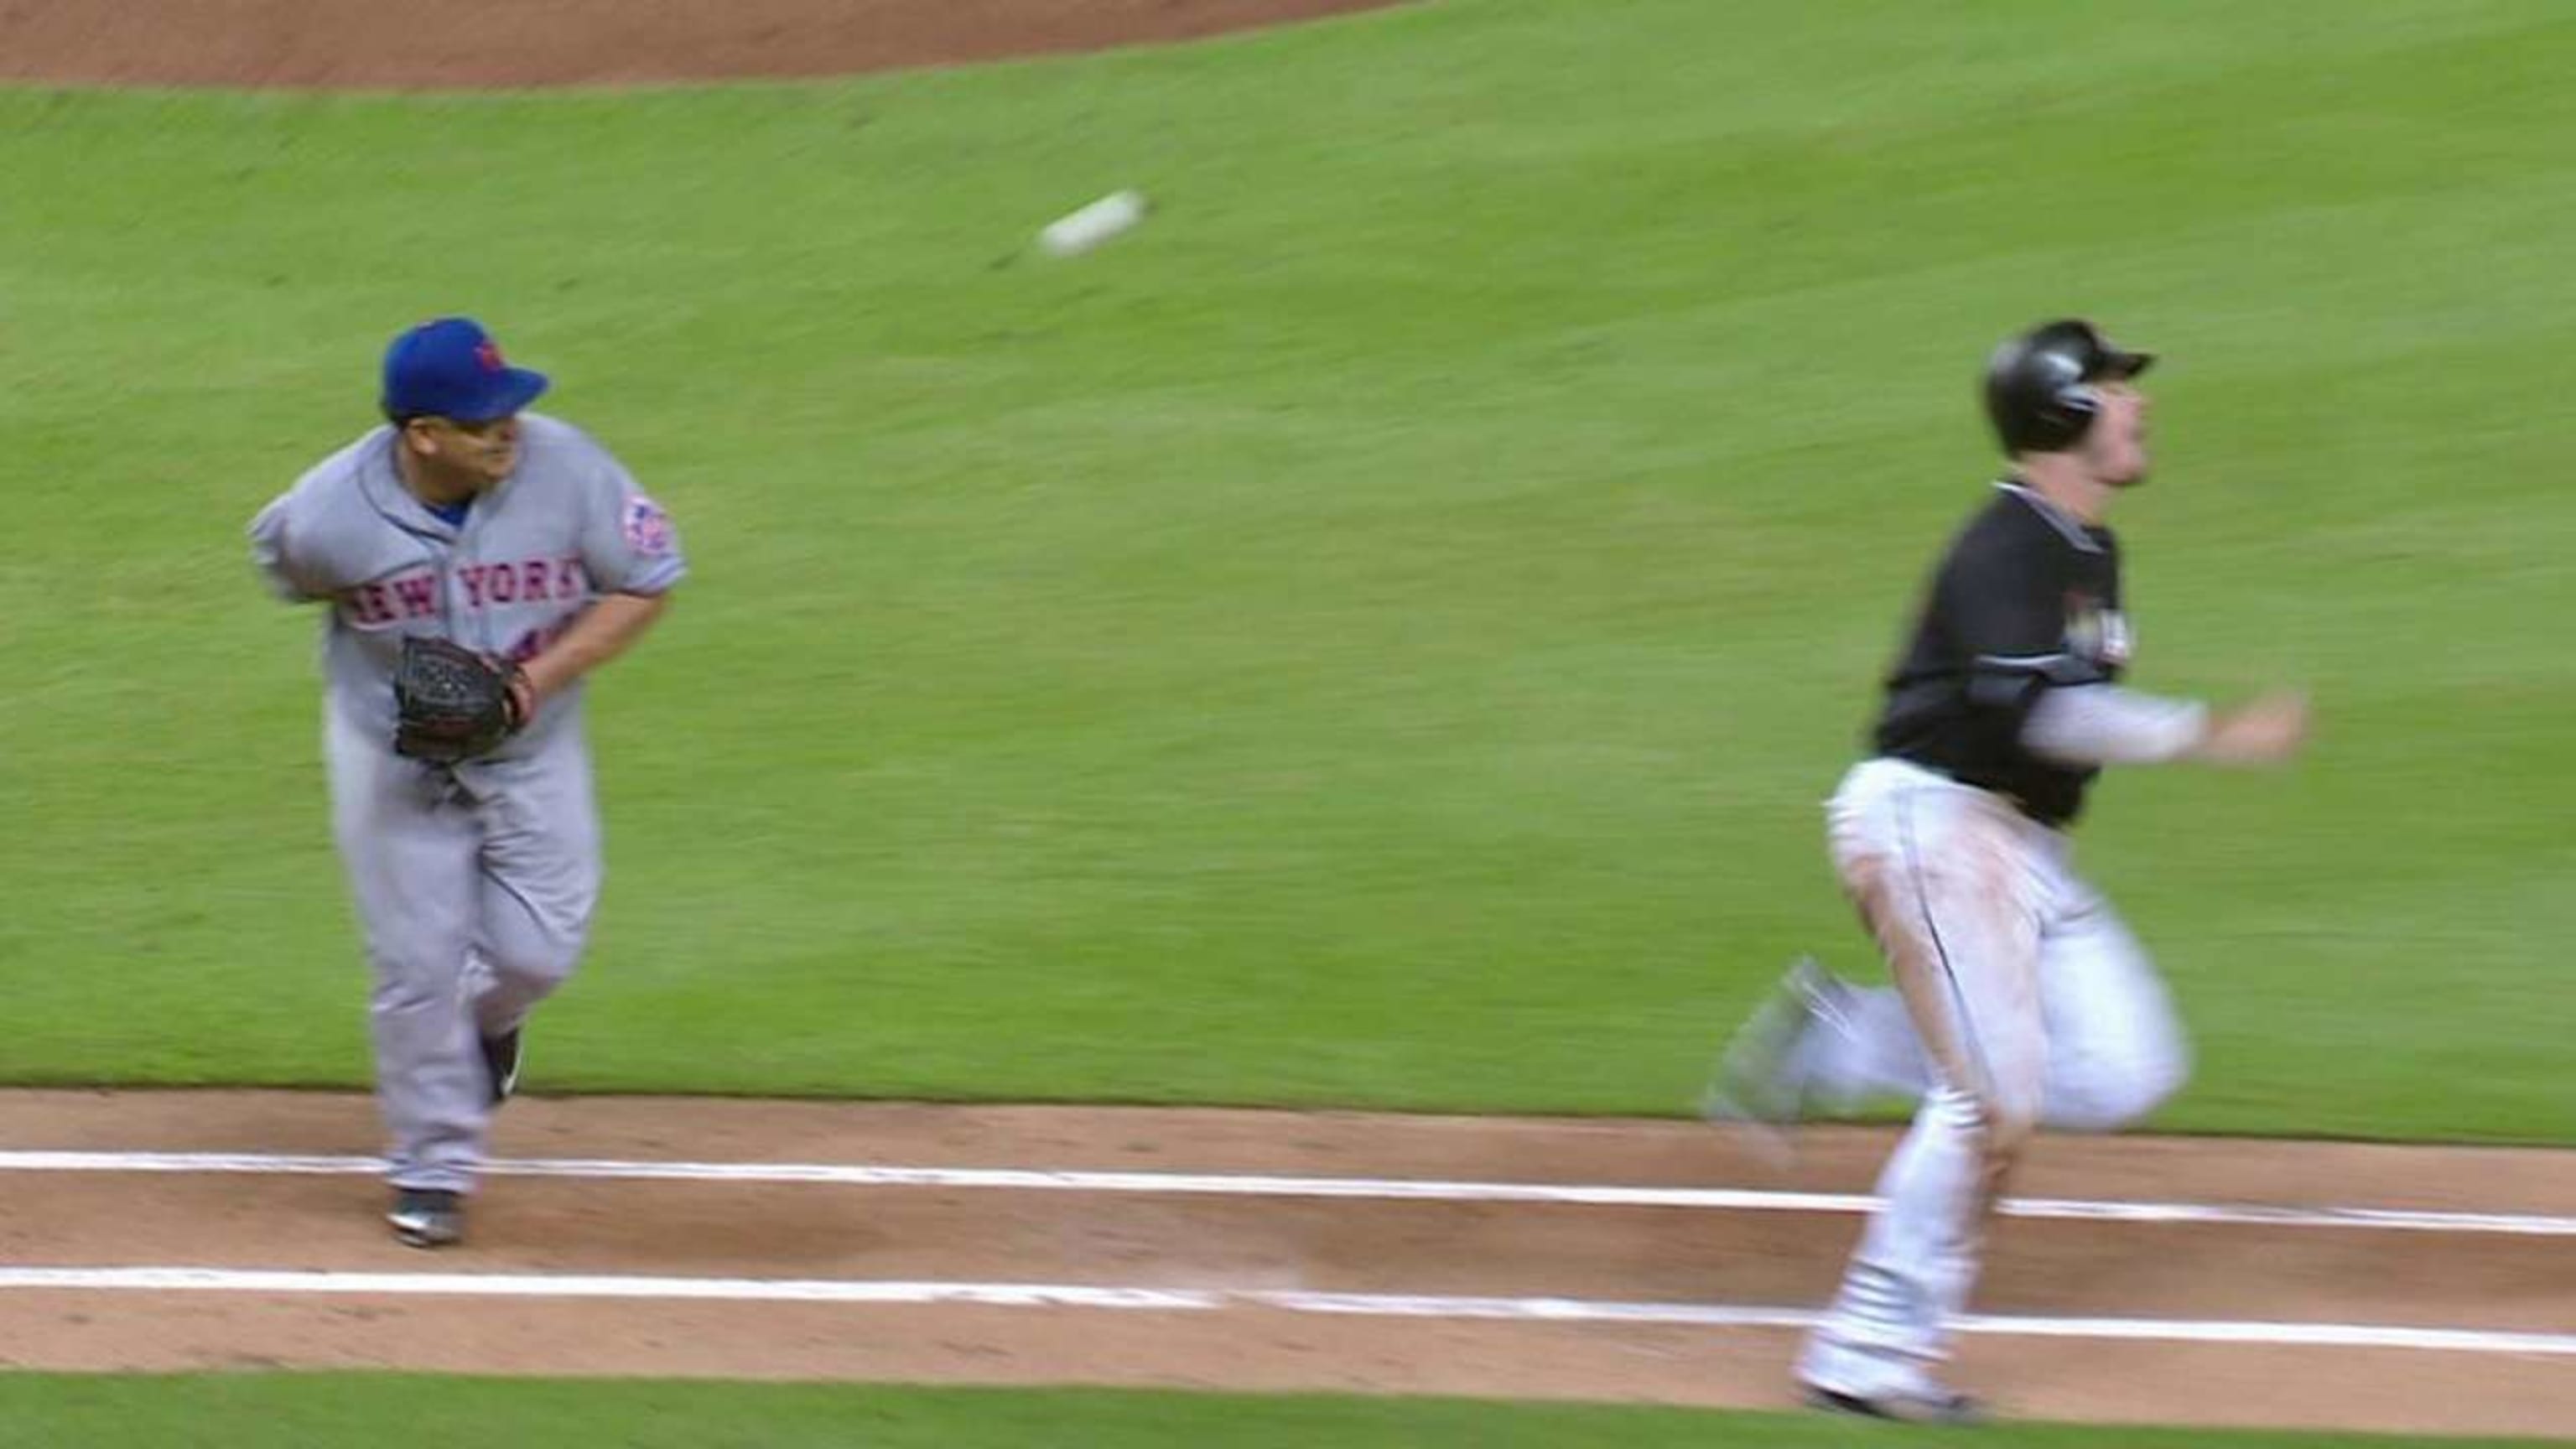 New York Mets Pitcher Bartolo Colon makes an awesome flip play